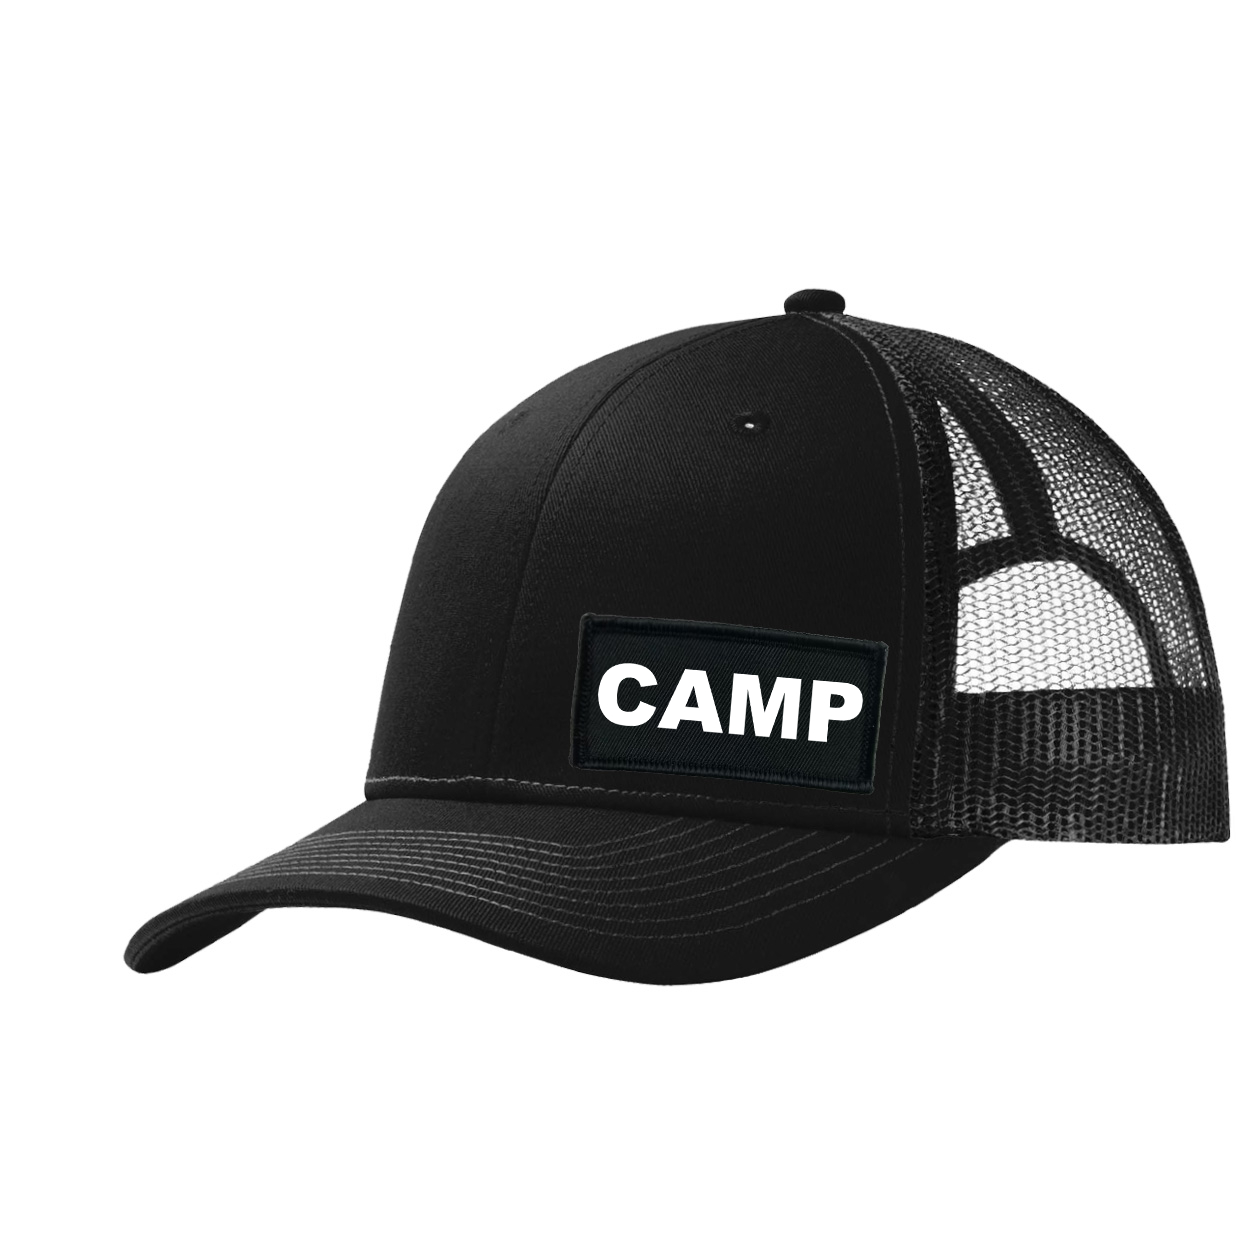 Camp Brand Logo Night Out Woven Patch Snapback Trucker Hat Black (White Logo)